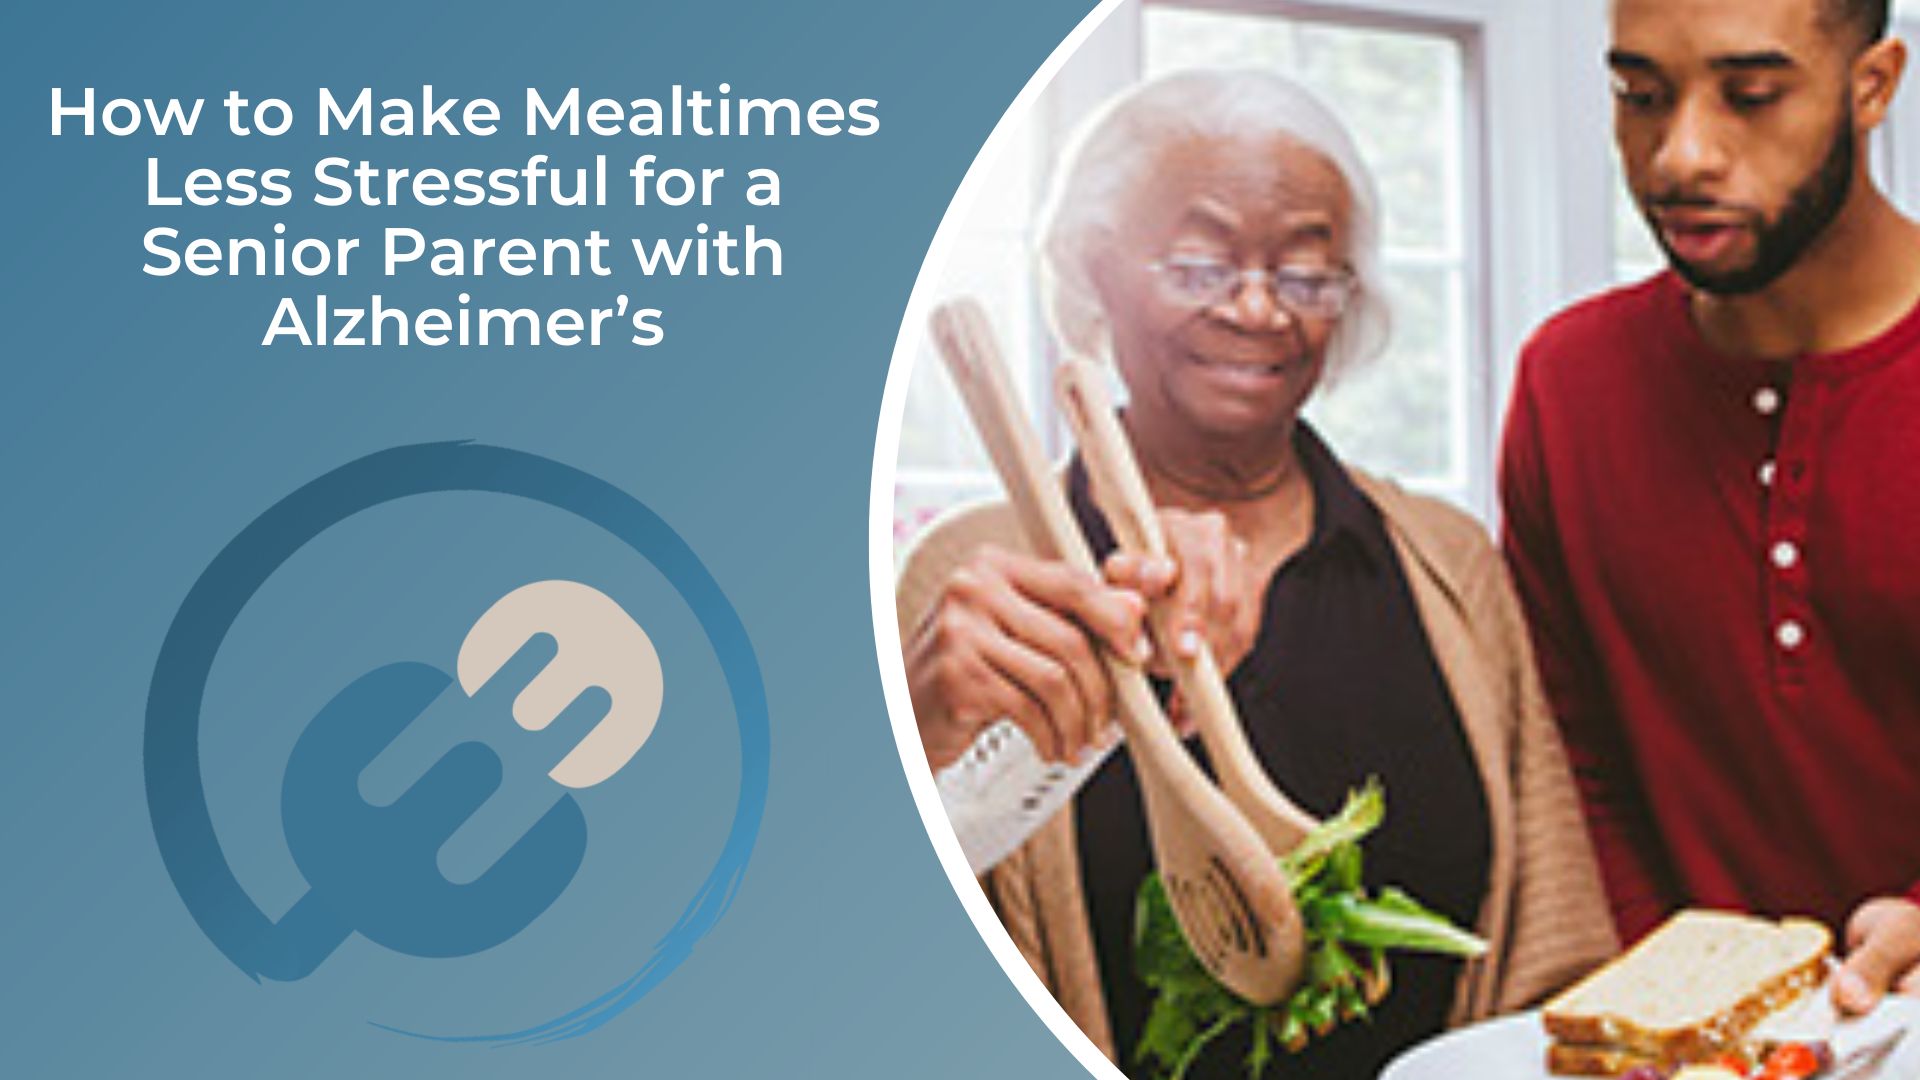 How to Make Mealtimes Less Stressful for a Senior Parent with Alzheimer’s